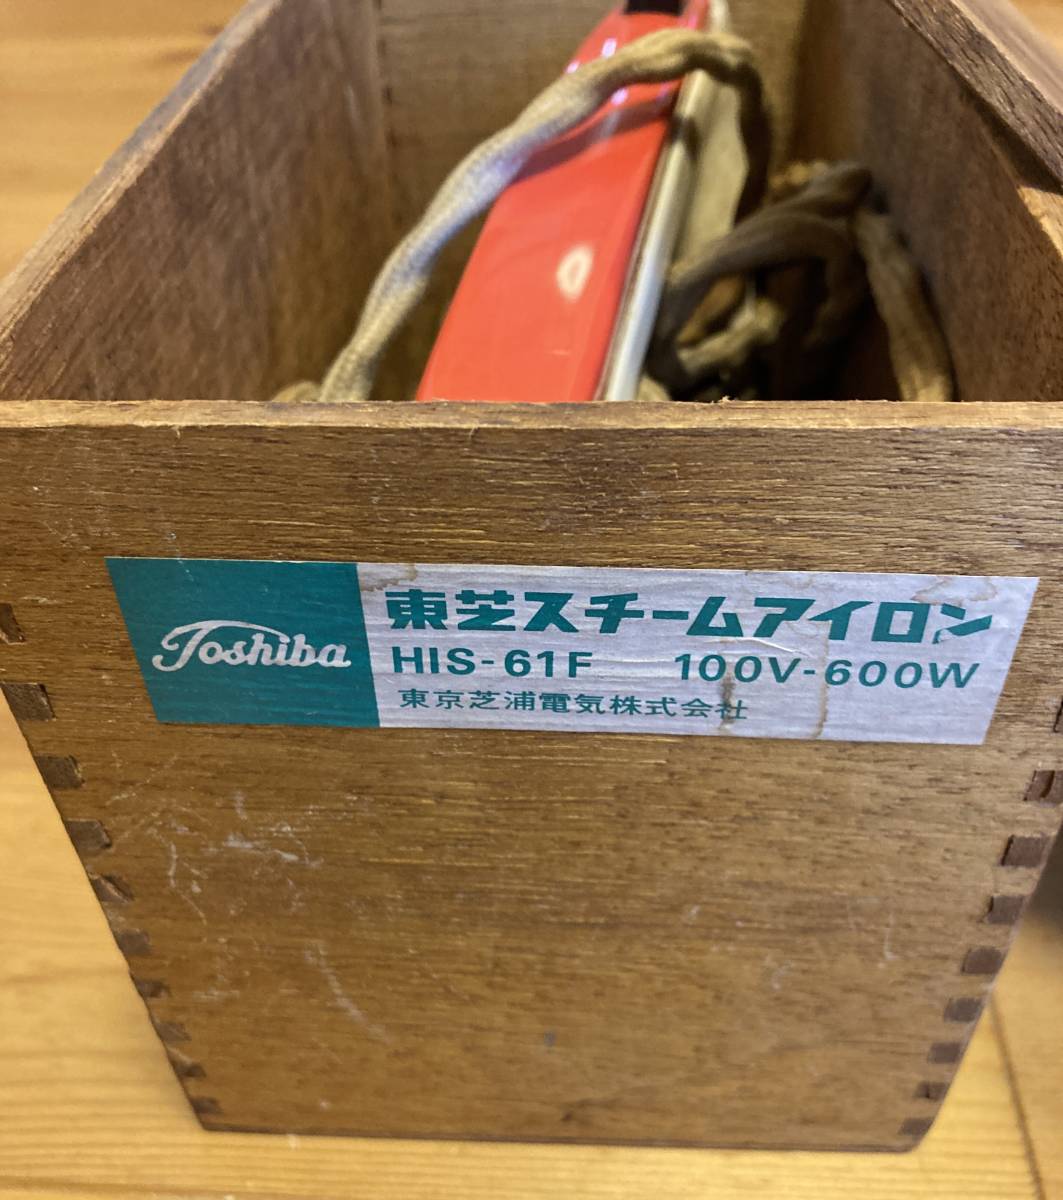 I* antique iron * Toshiba steam iron HIS-61F electrification has confirmed boxed | present condition delivery 